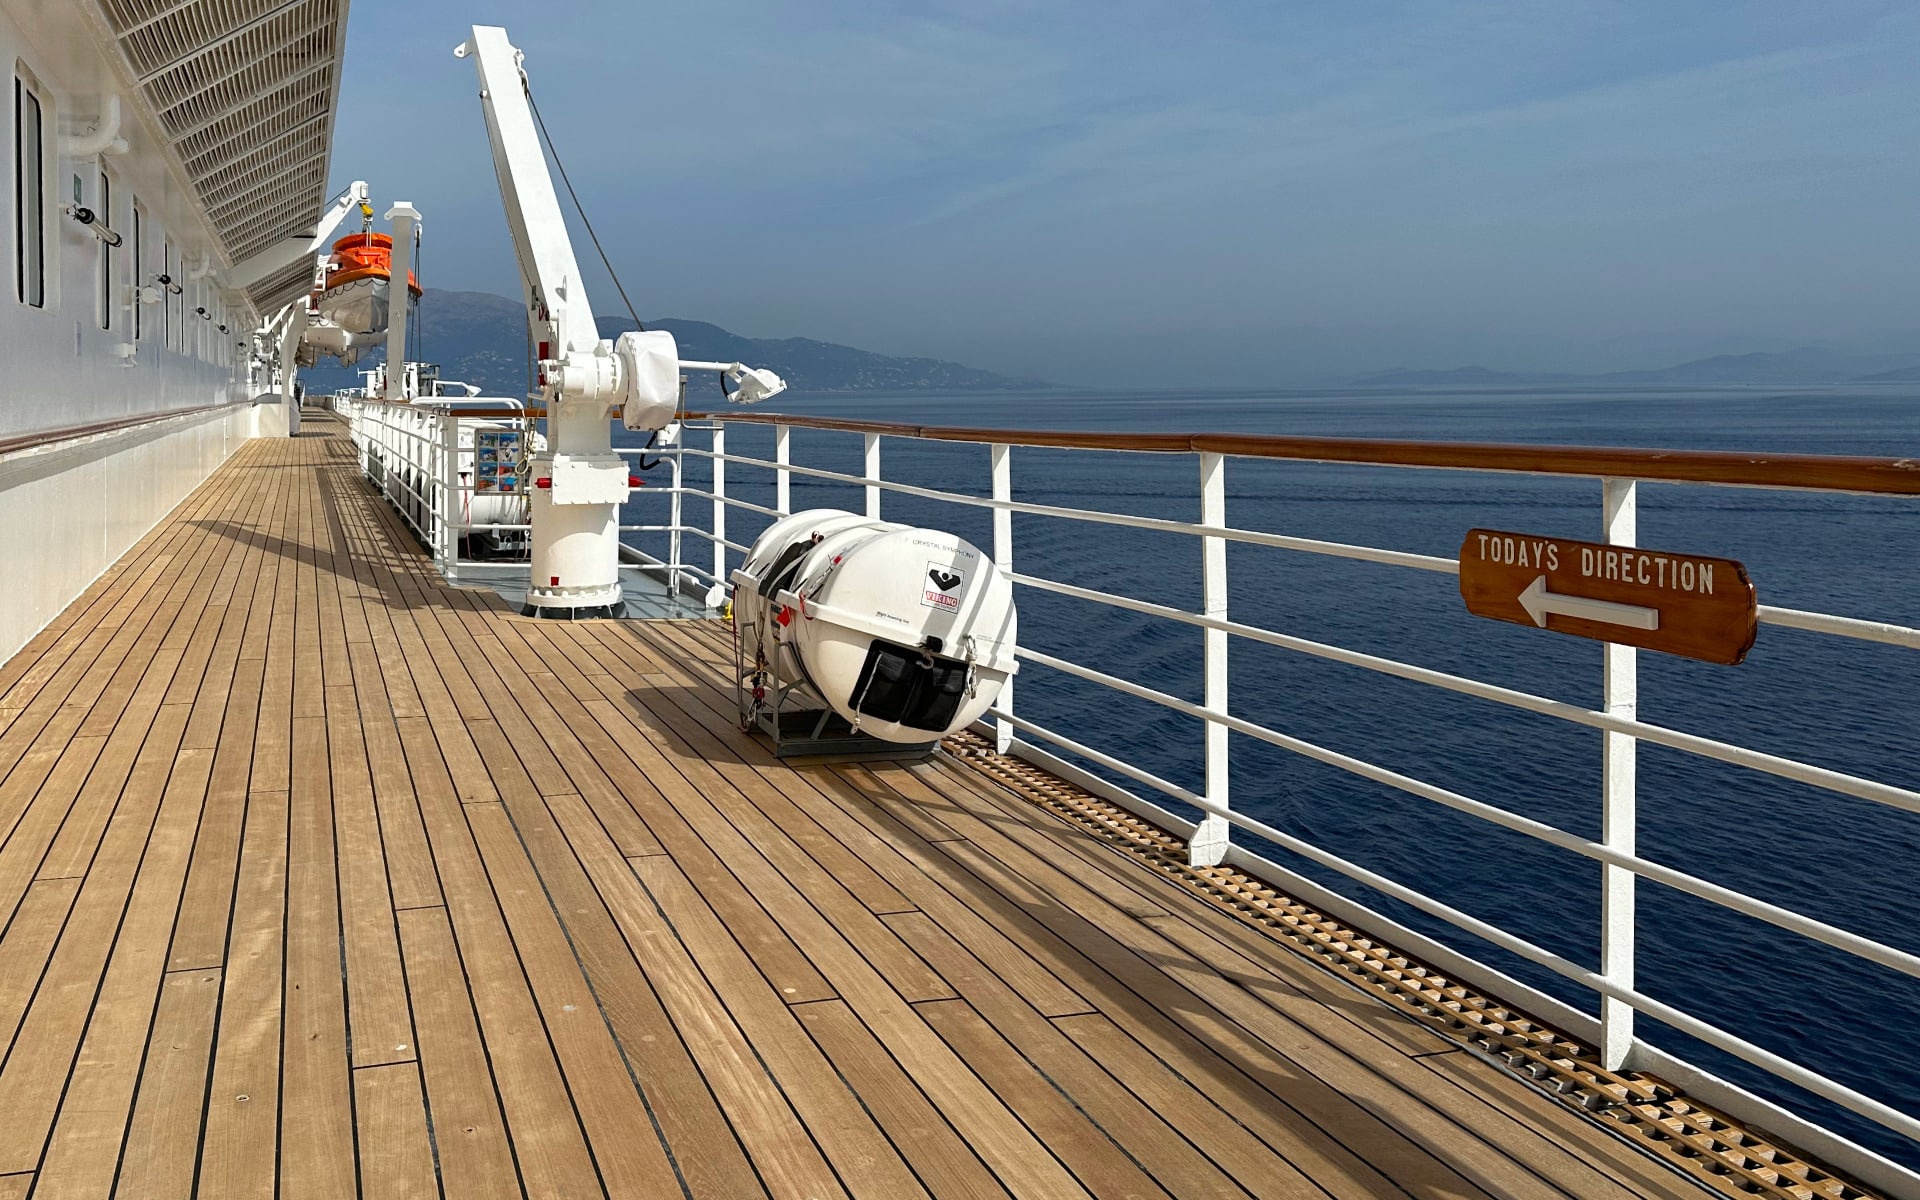 The magnificent Promenade deck on the Chrystal Symphony cruise ship.